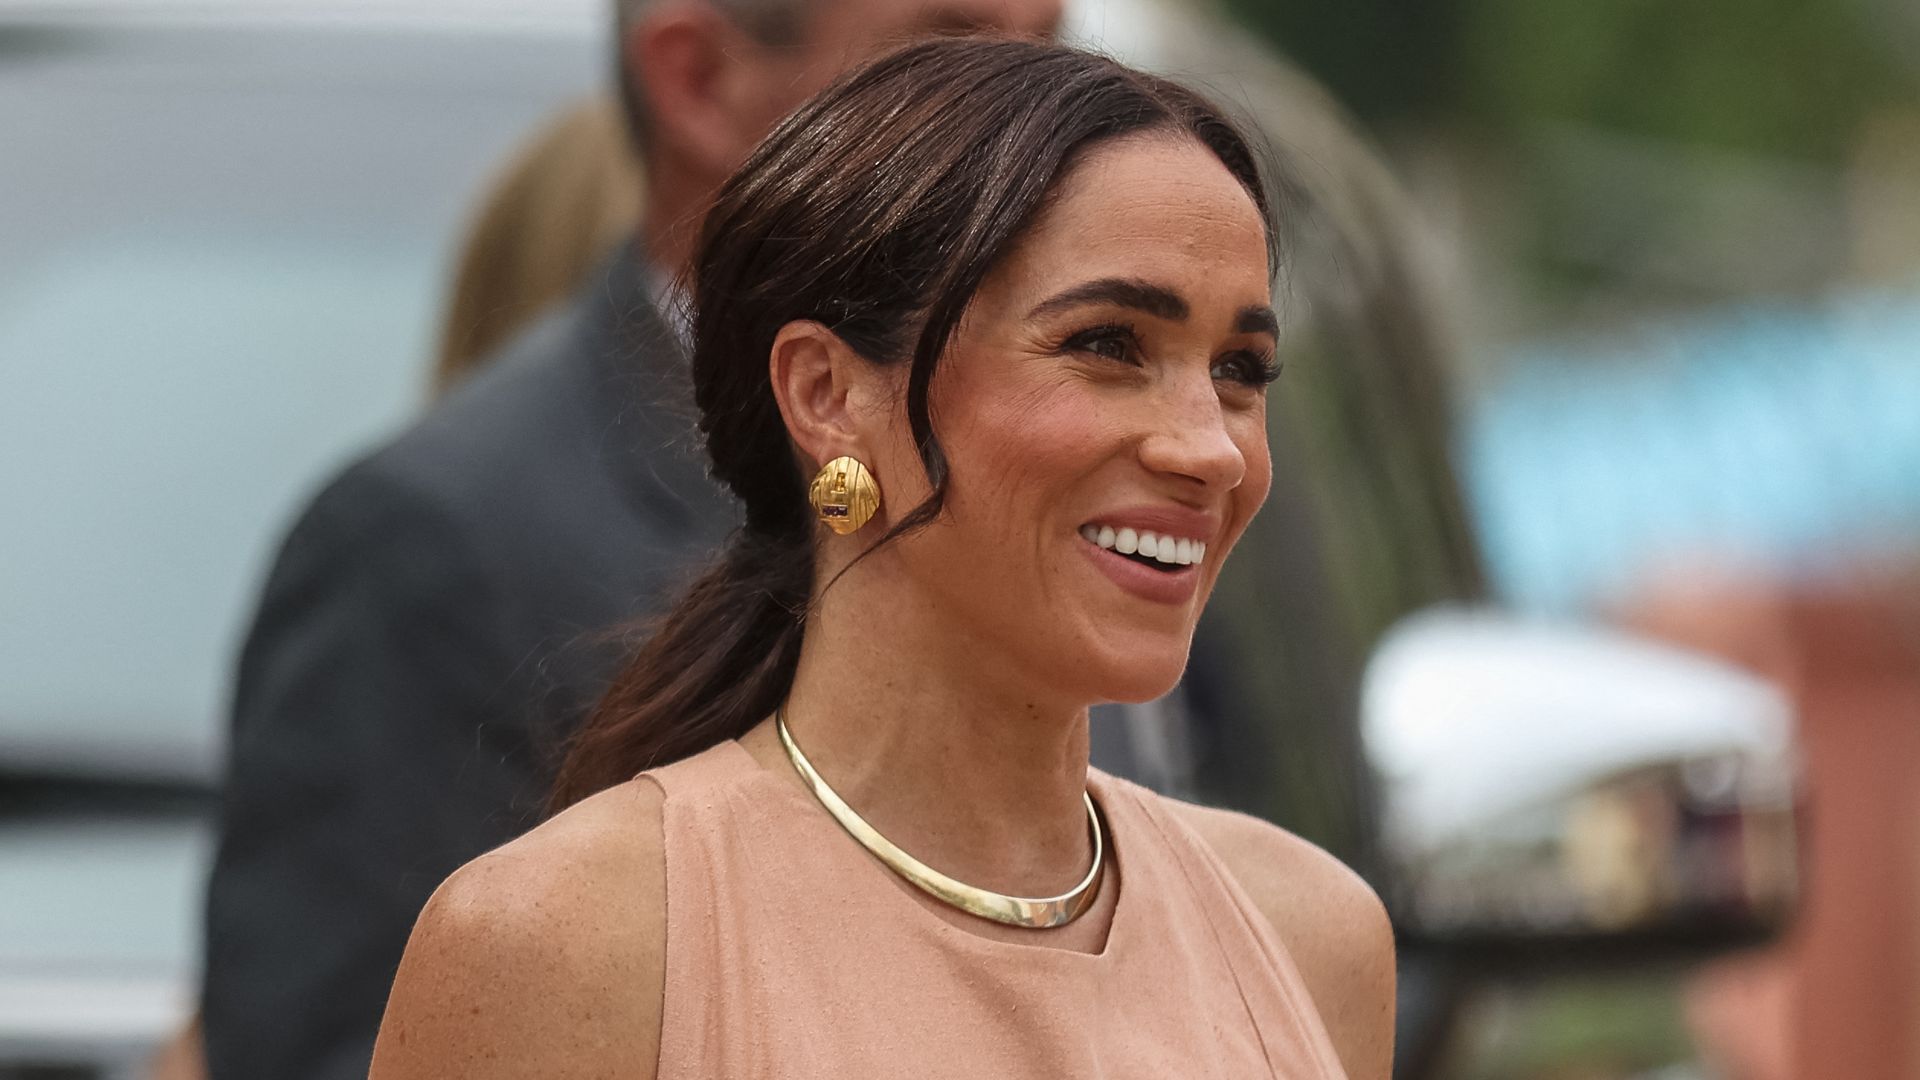 Meghan Markle is perfectly poised in backless waist-cinching look with fairytale updo